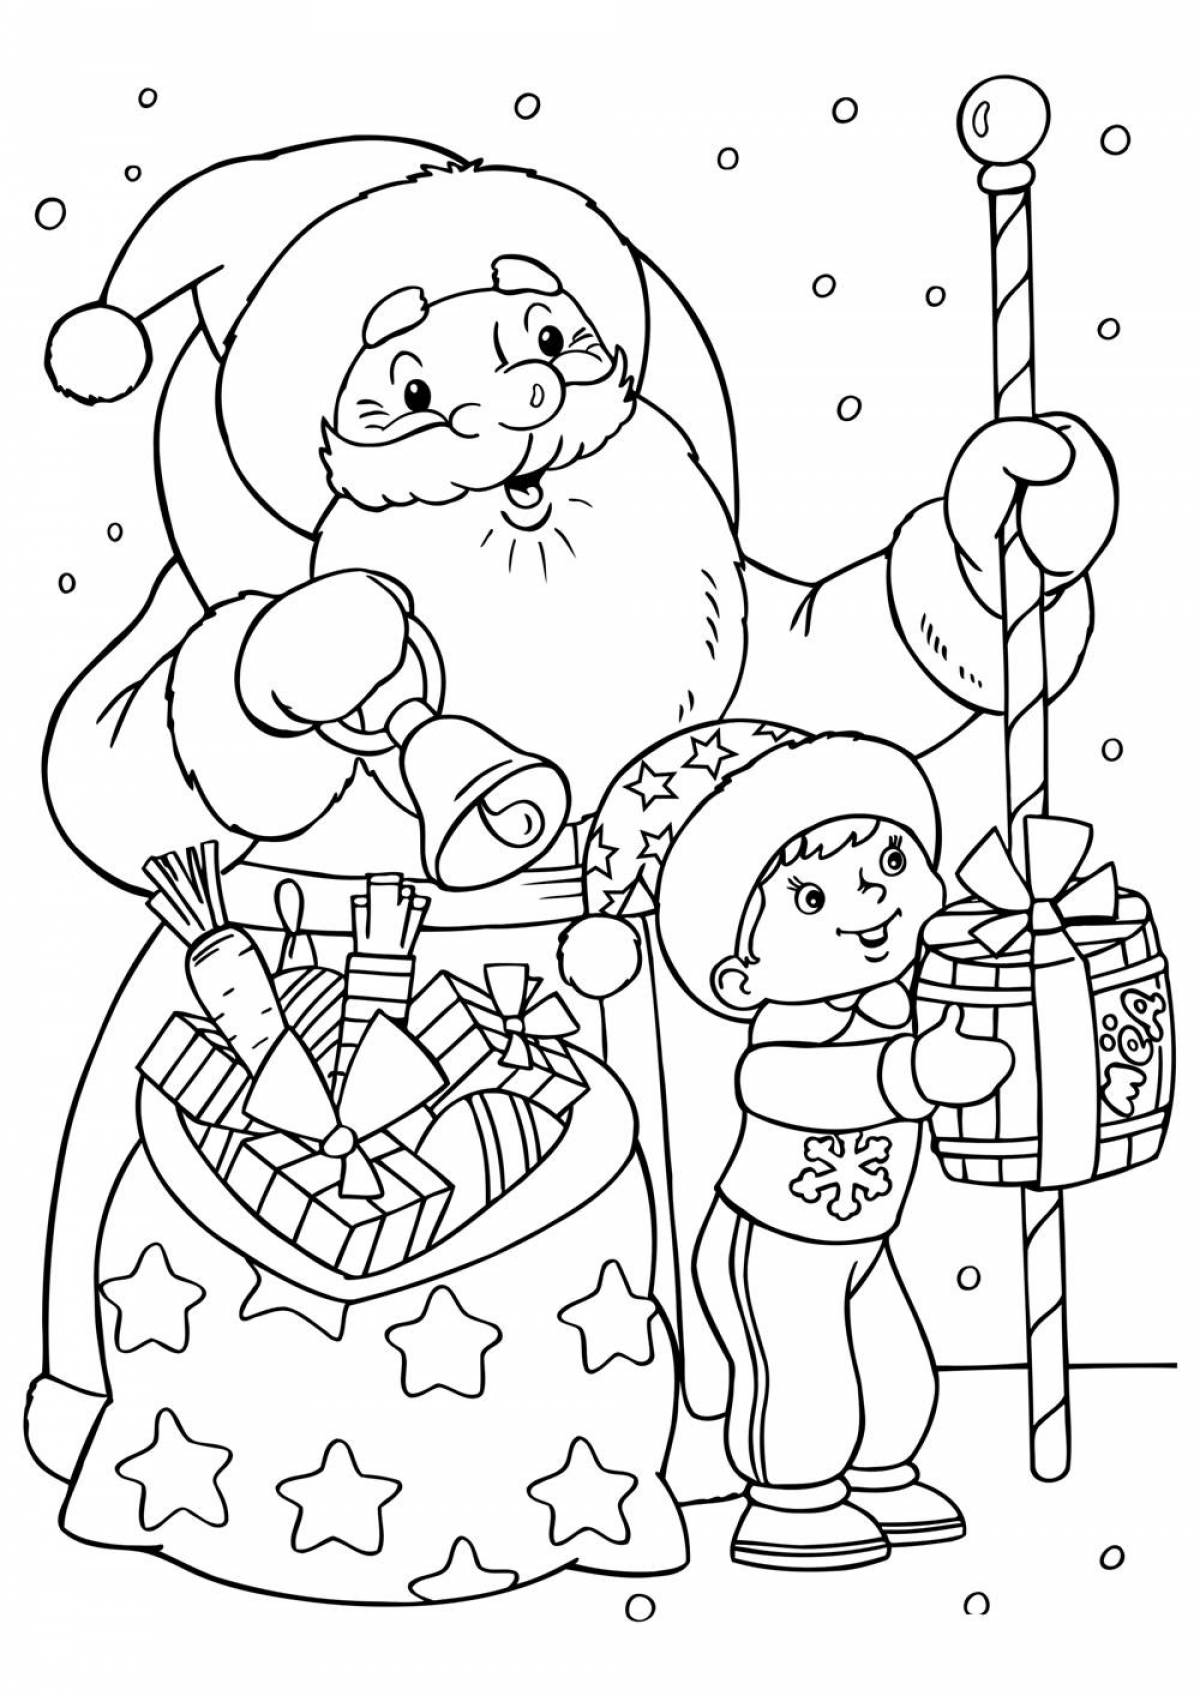 Live coloring of santa claus for children 2-3 years old